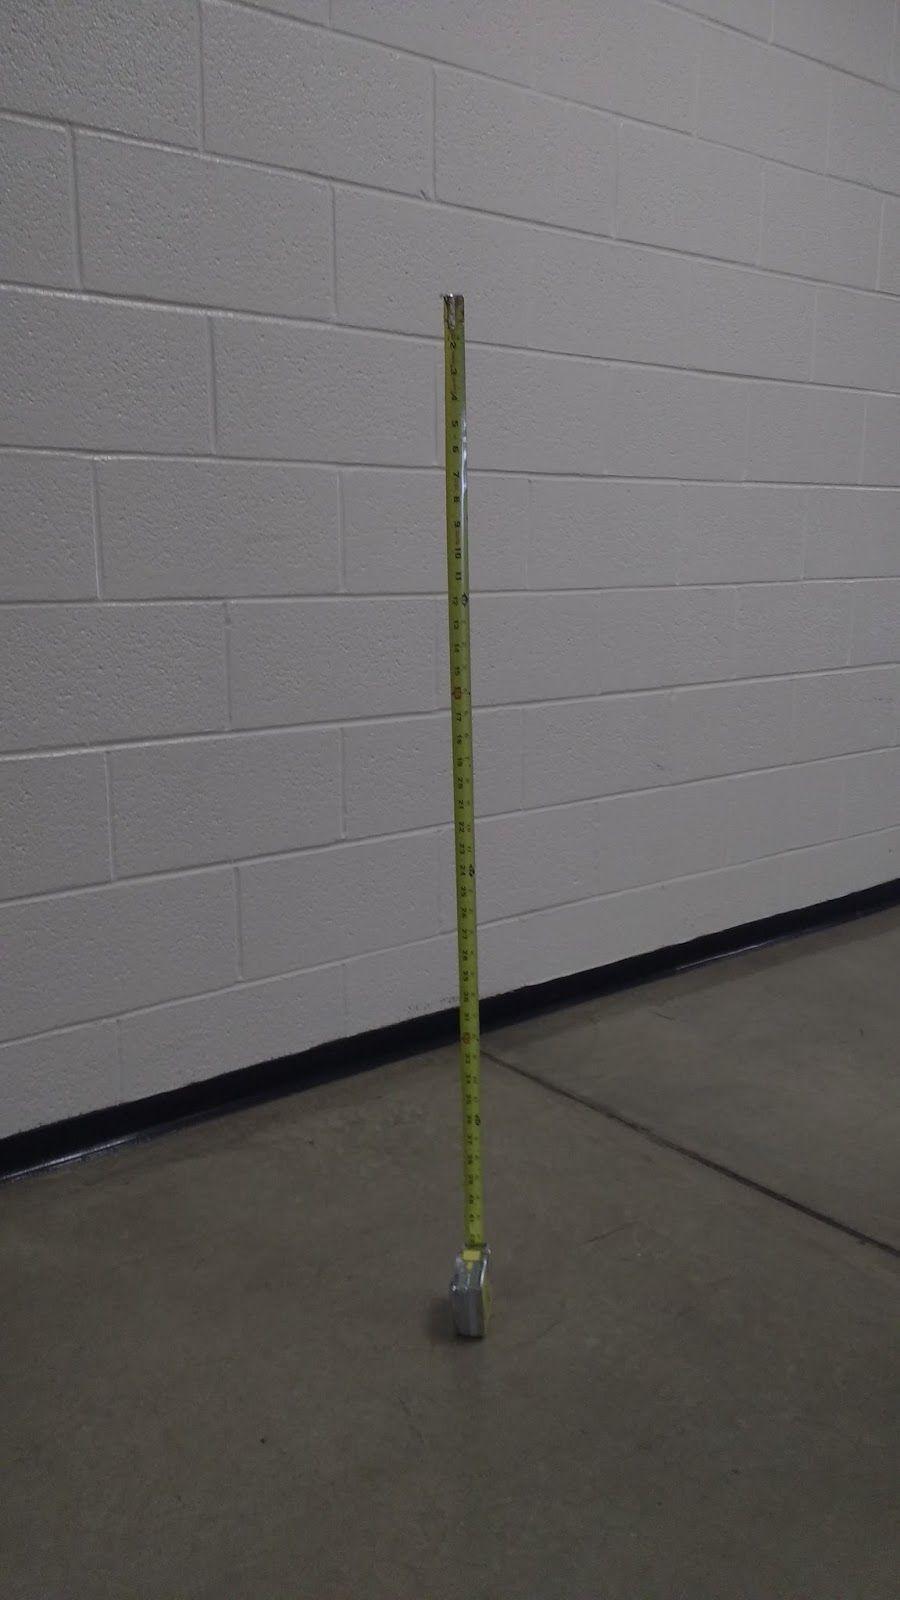 Hover Challenge 2.1 To set up this challenge you will need a tape measure or some way to determine a specified height.